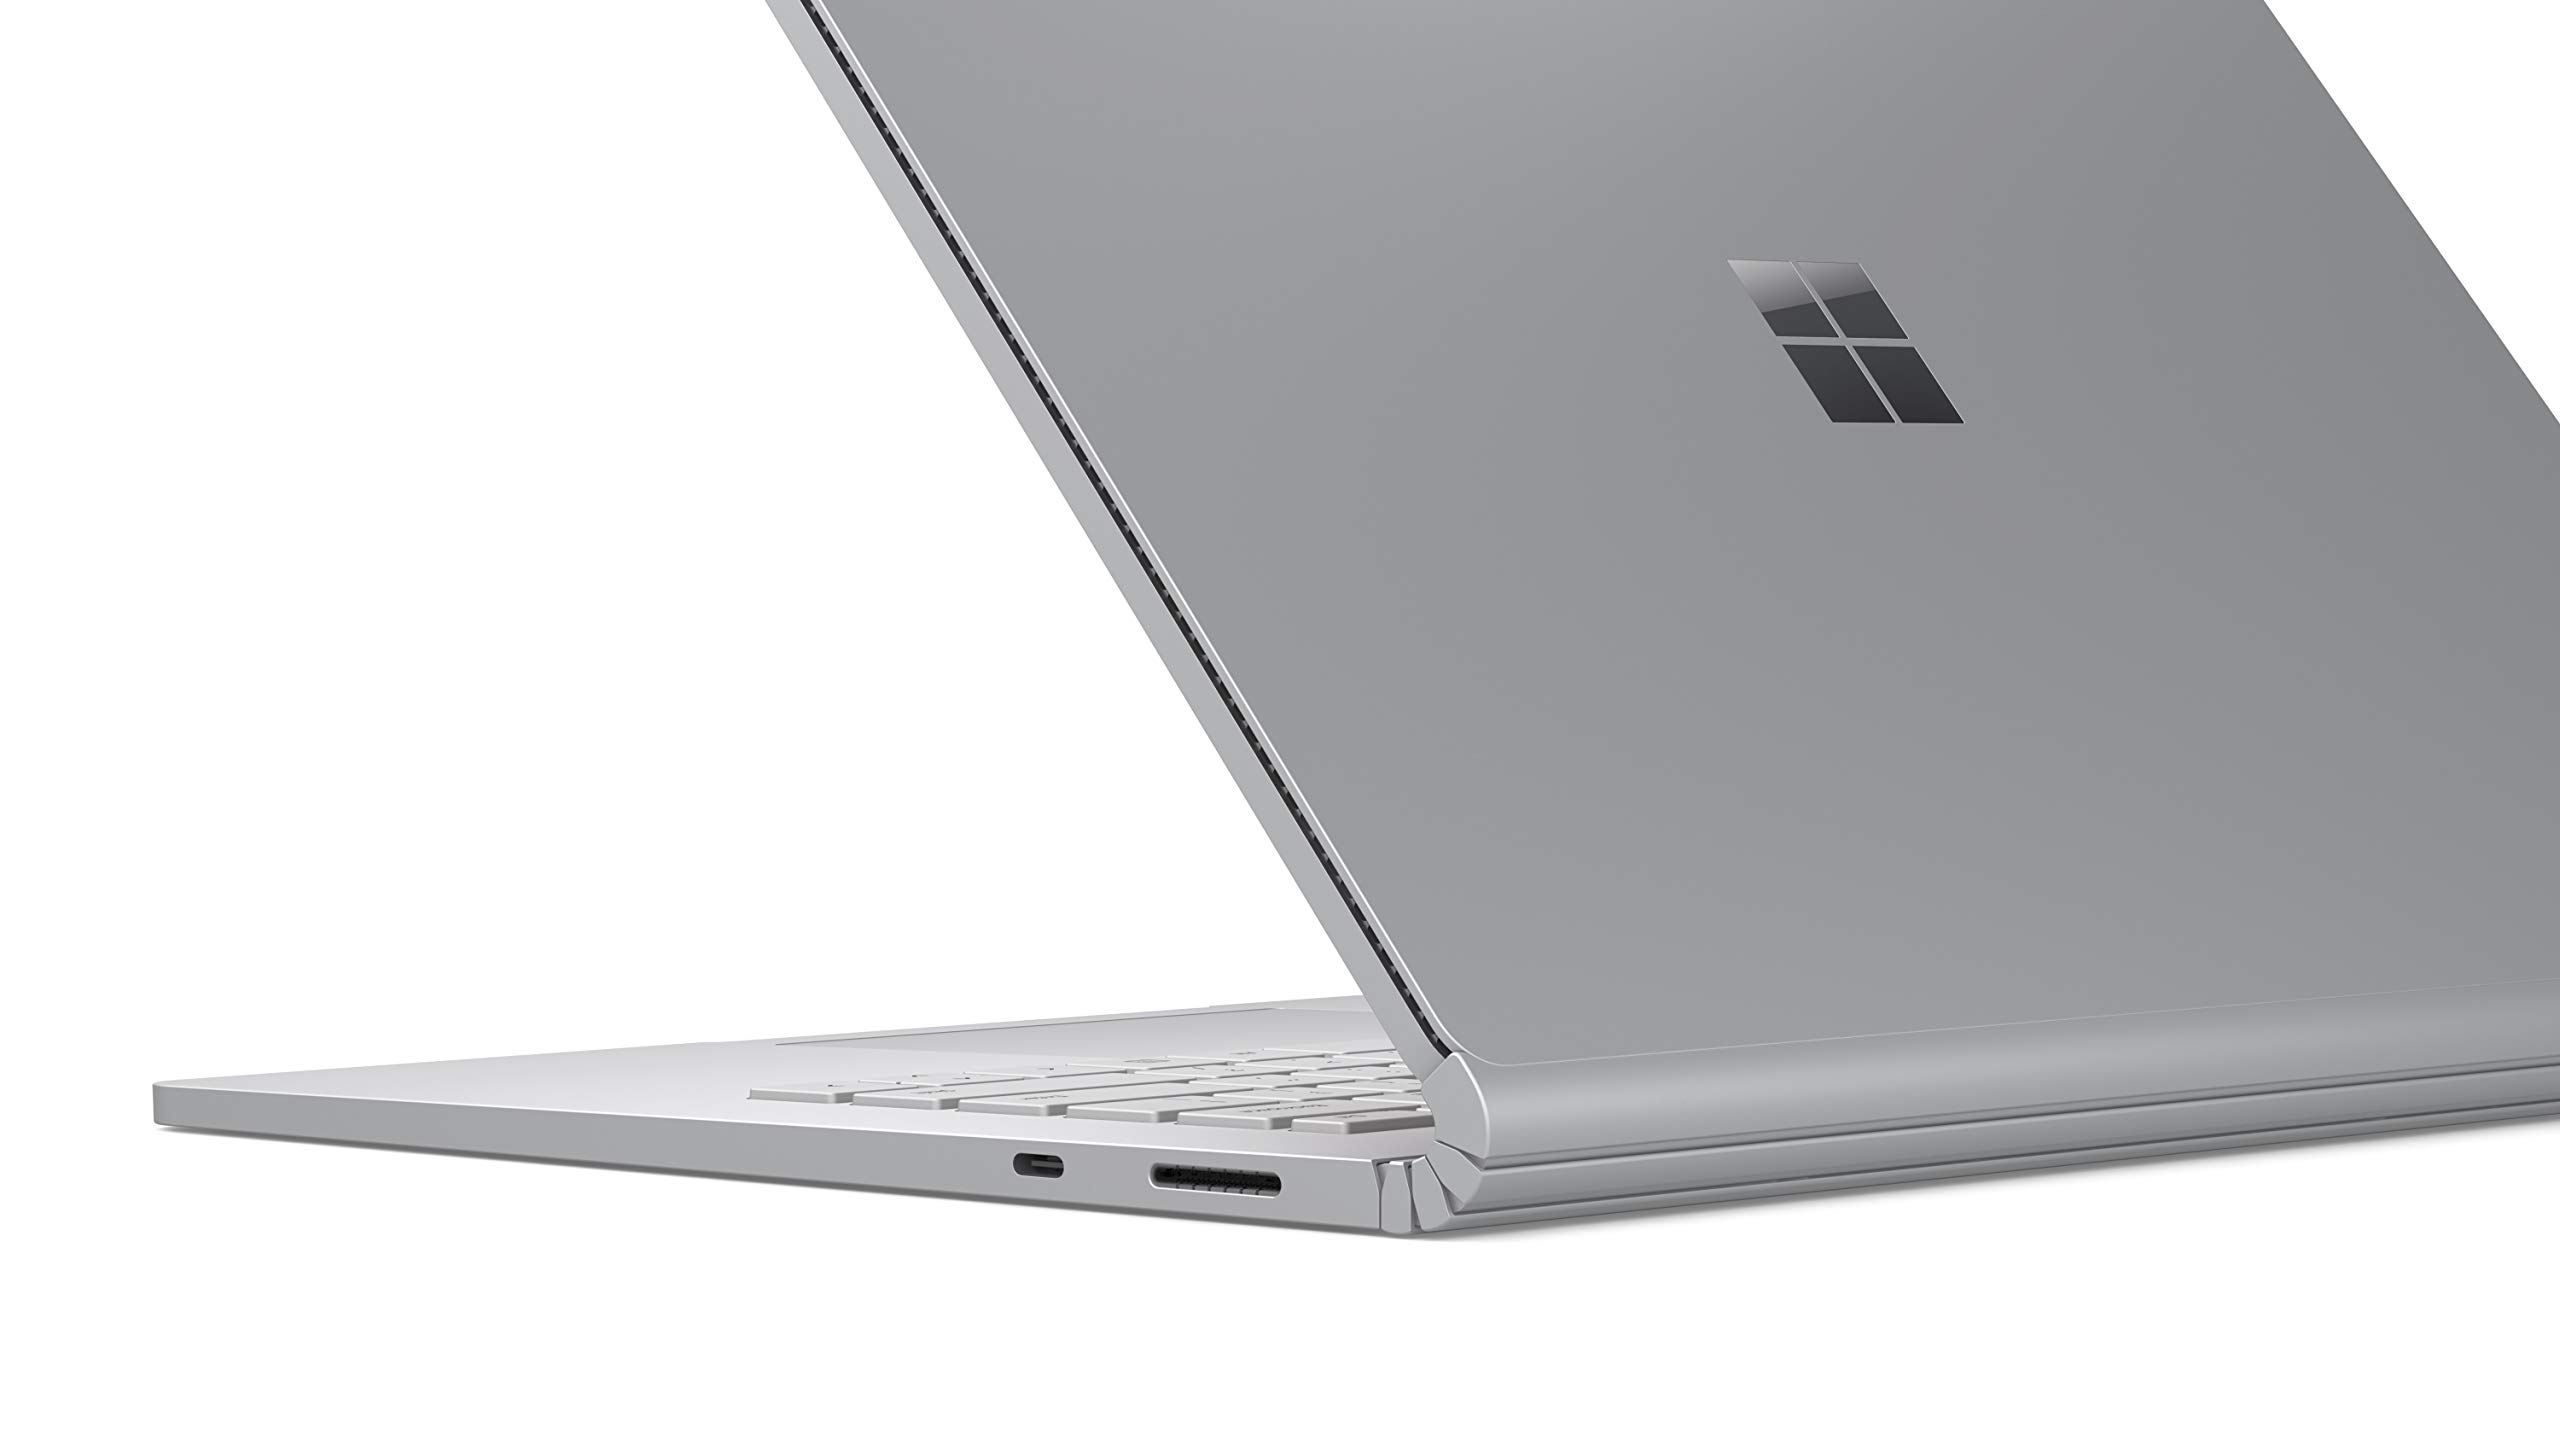 New Microsoft Surface Book 3 - 13.5